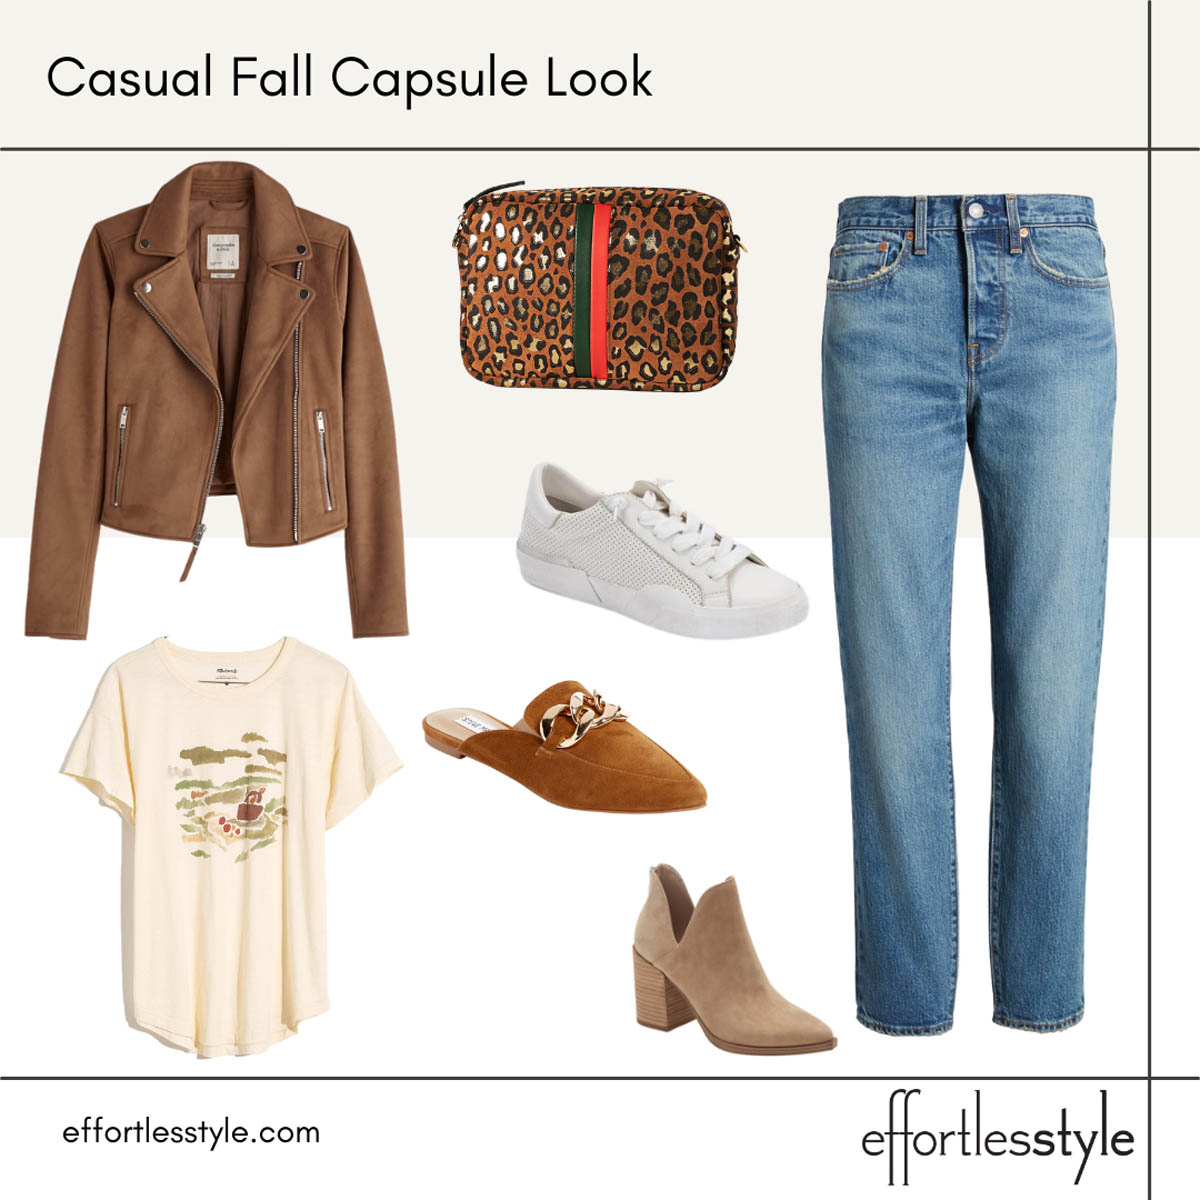 Fall Capsule Wardrobe Looks Suede Moto Jacket and Graphic Tee Outfit